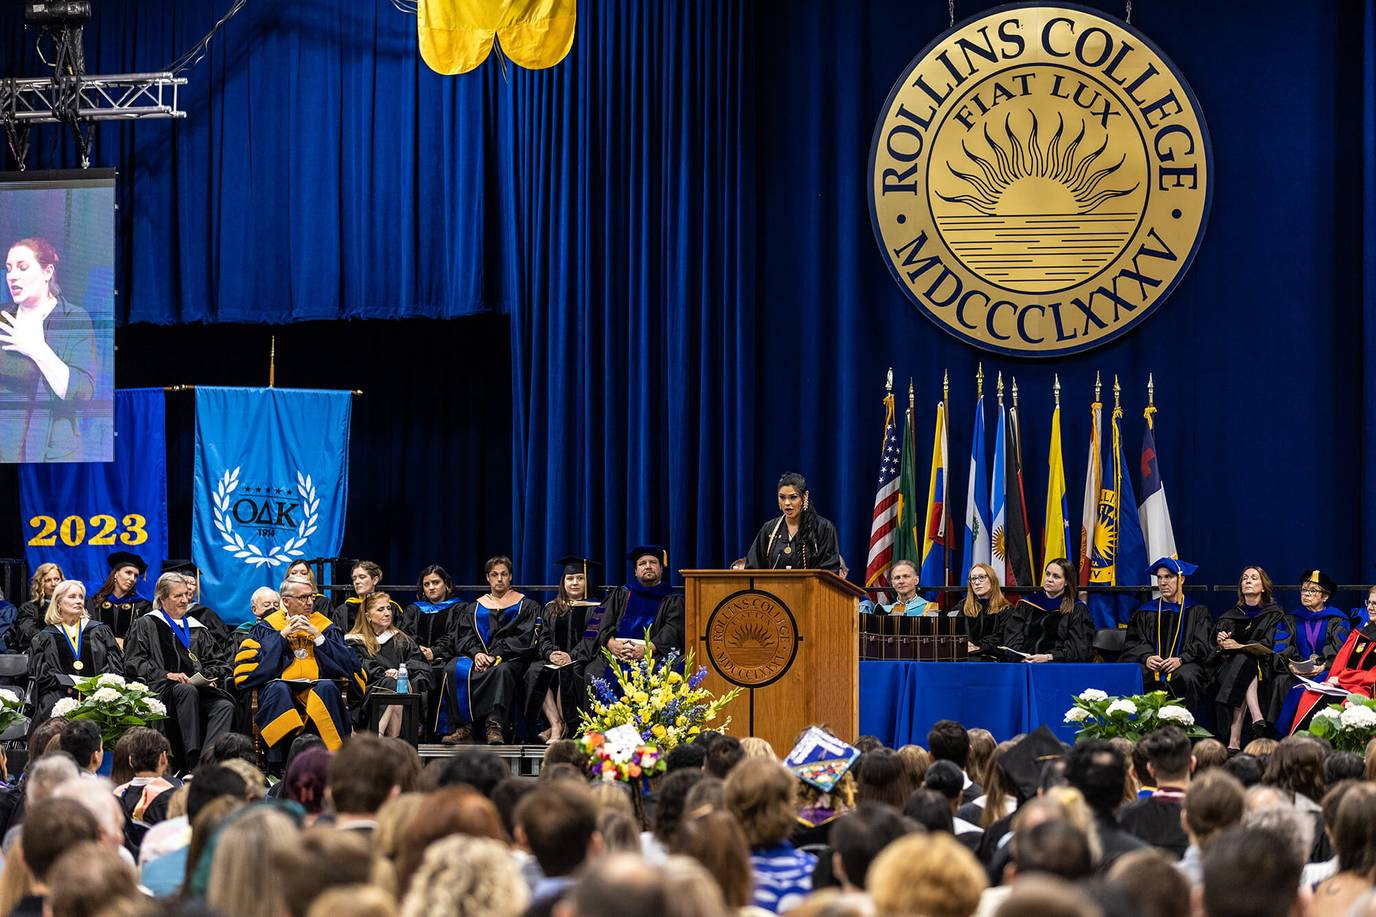 Daniebeth Martinez Negron delivers the Holt Outstanding Senior address during the 2023 Hamilton Holt School commencement.